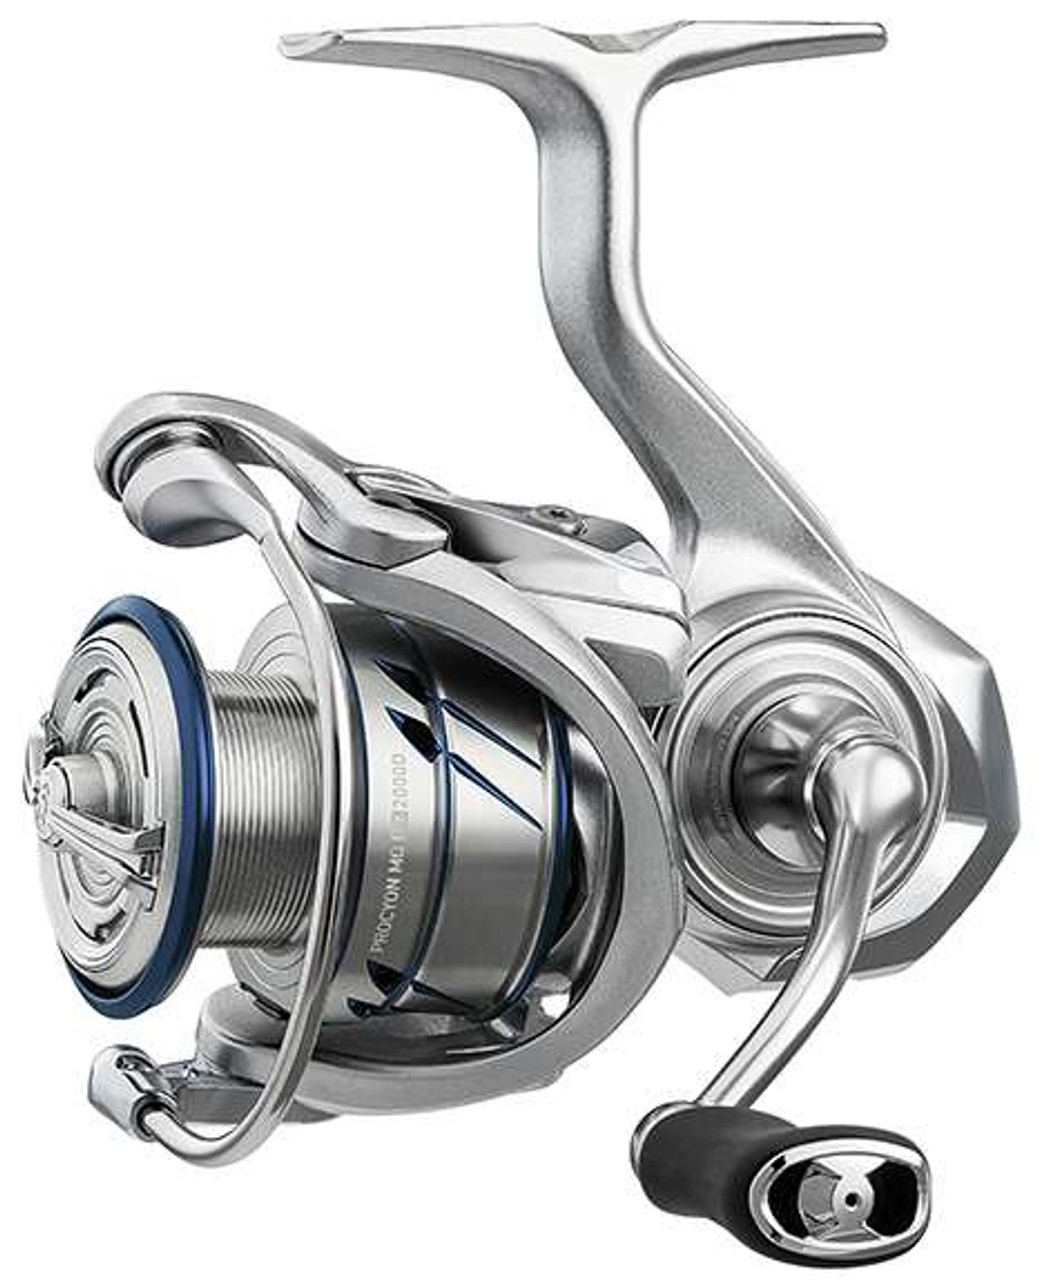 Procyon MQ LT 4000 D CXH Spinning Reel - Silver - Ramsey Outdoor